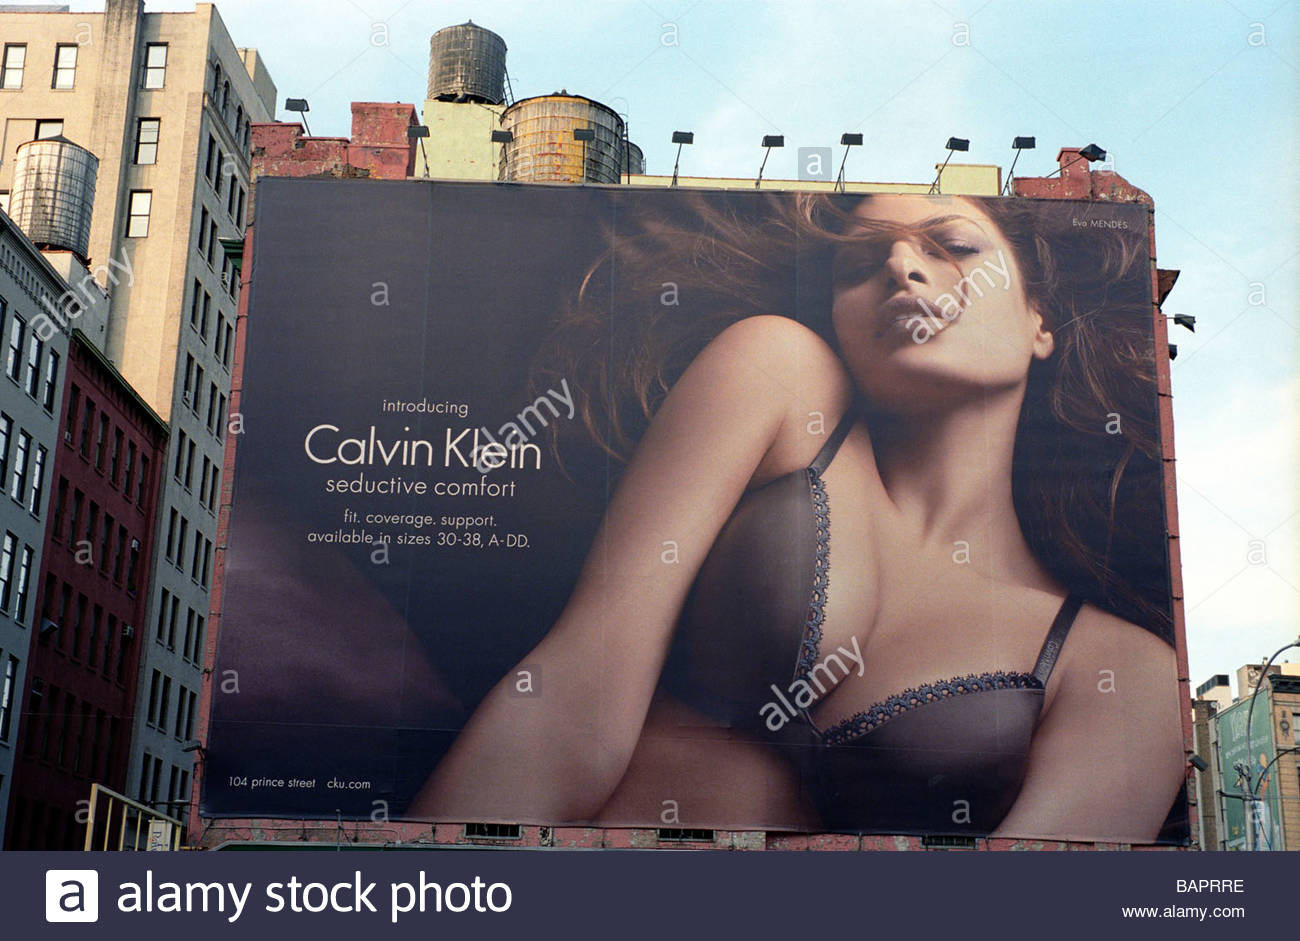 Calvin Klein Poster High Resolution Stock Photography and Images - Alamy